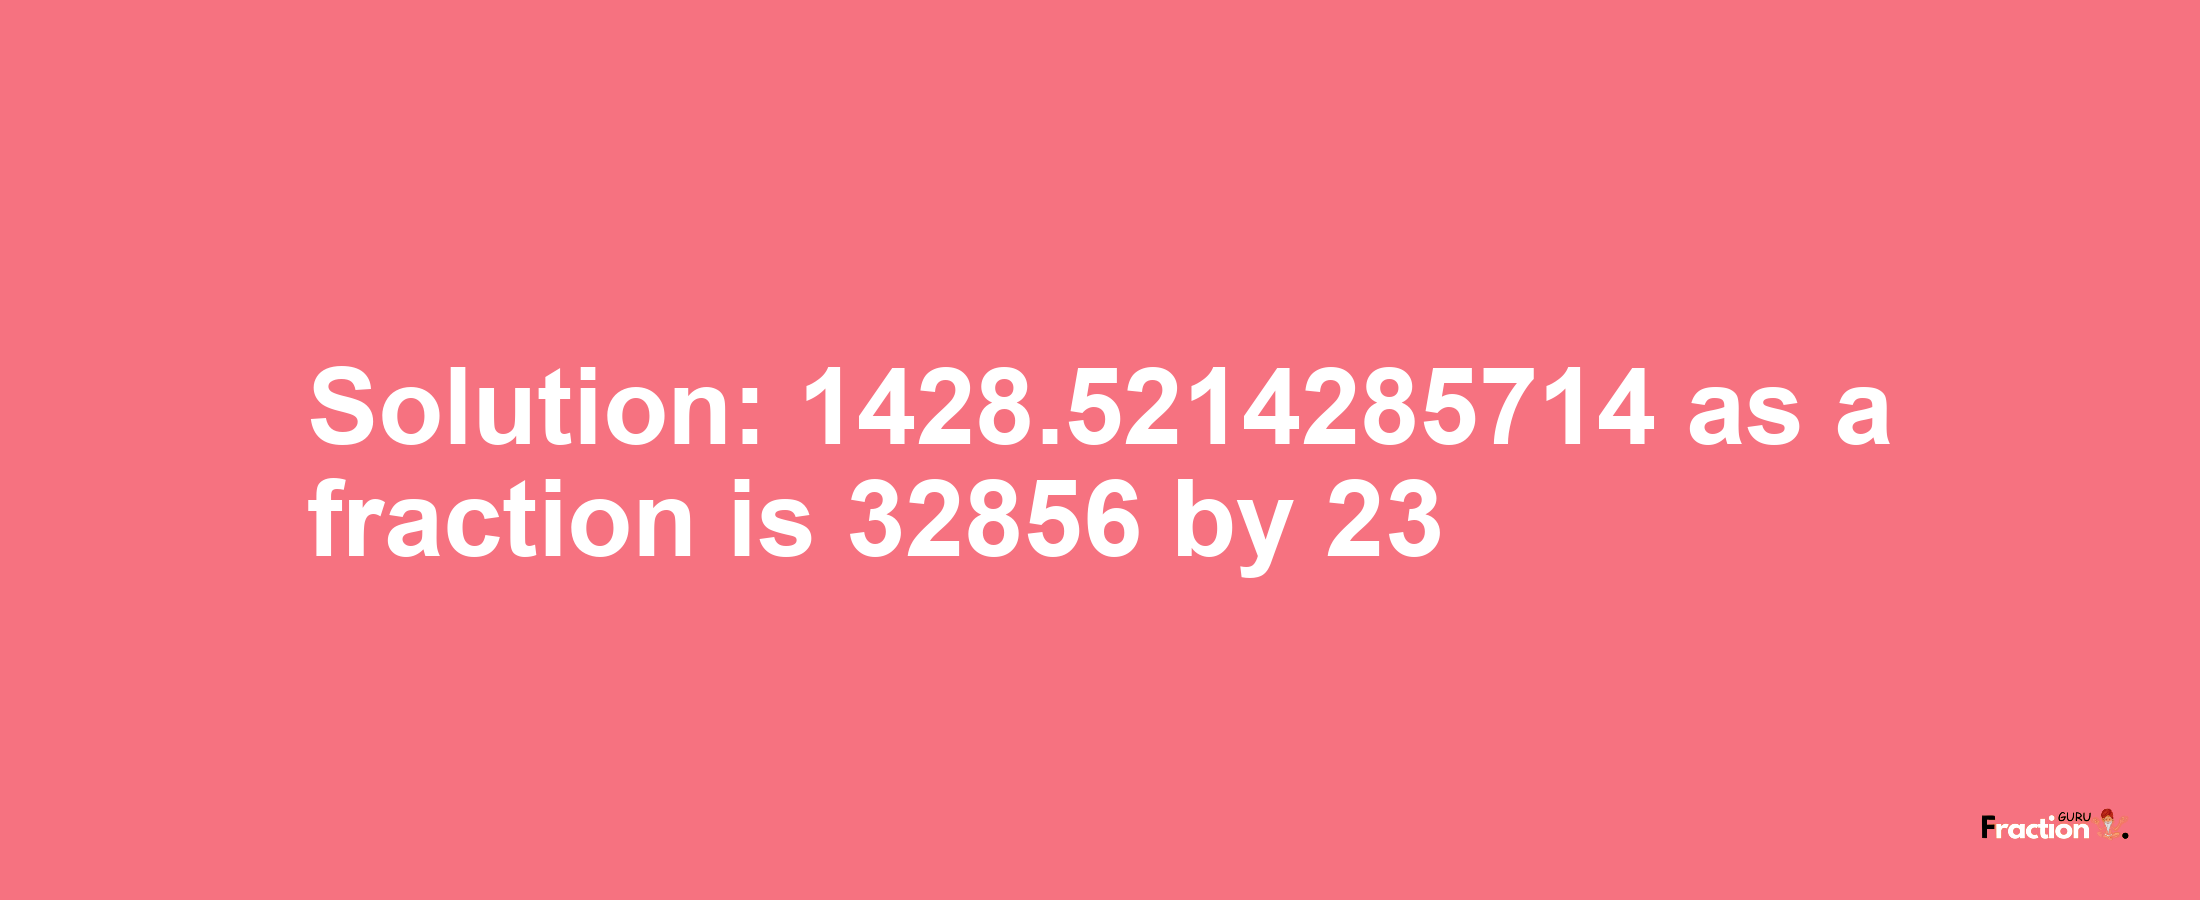 Solution:1428.5214285714 as a fraction is 32856/23